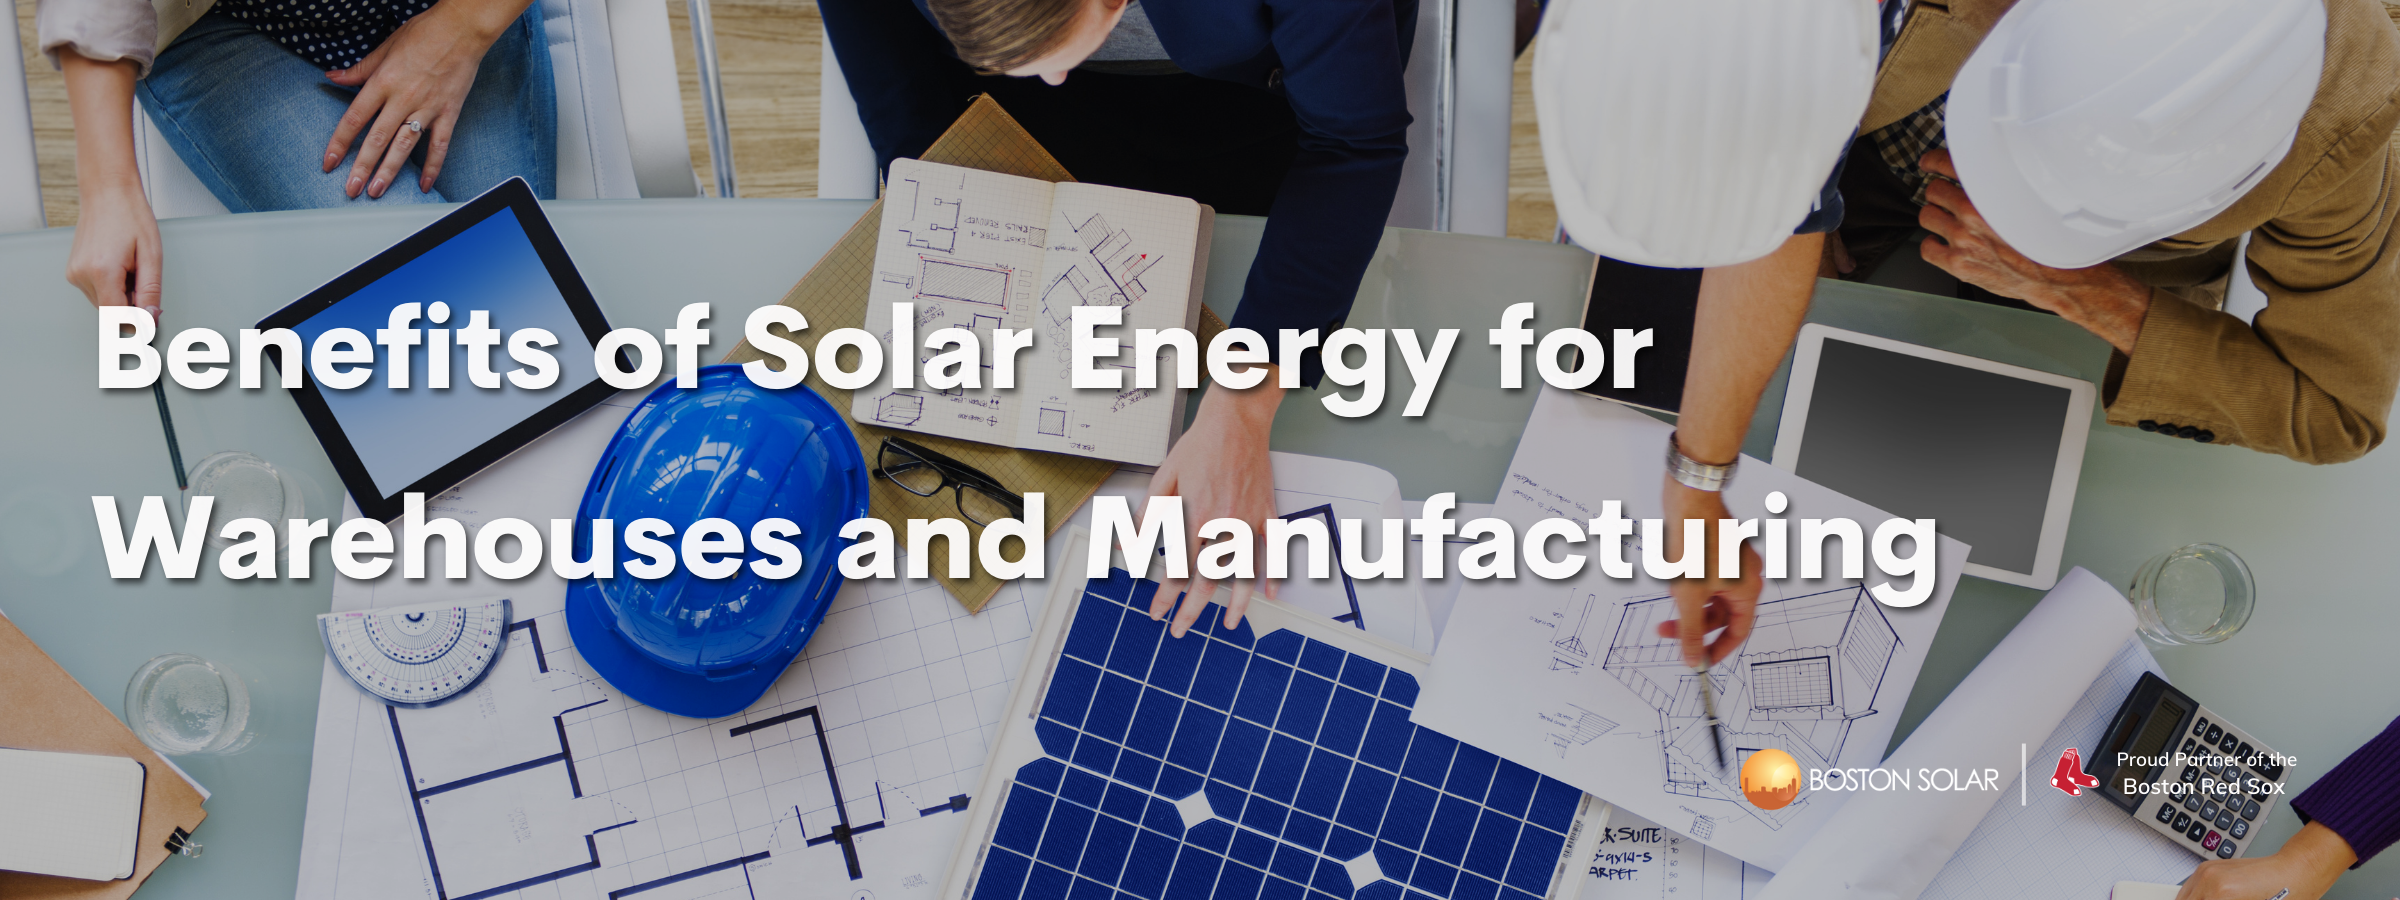 Benefits of Solar Energy for Warehouses and Manufacturing